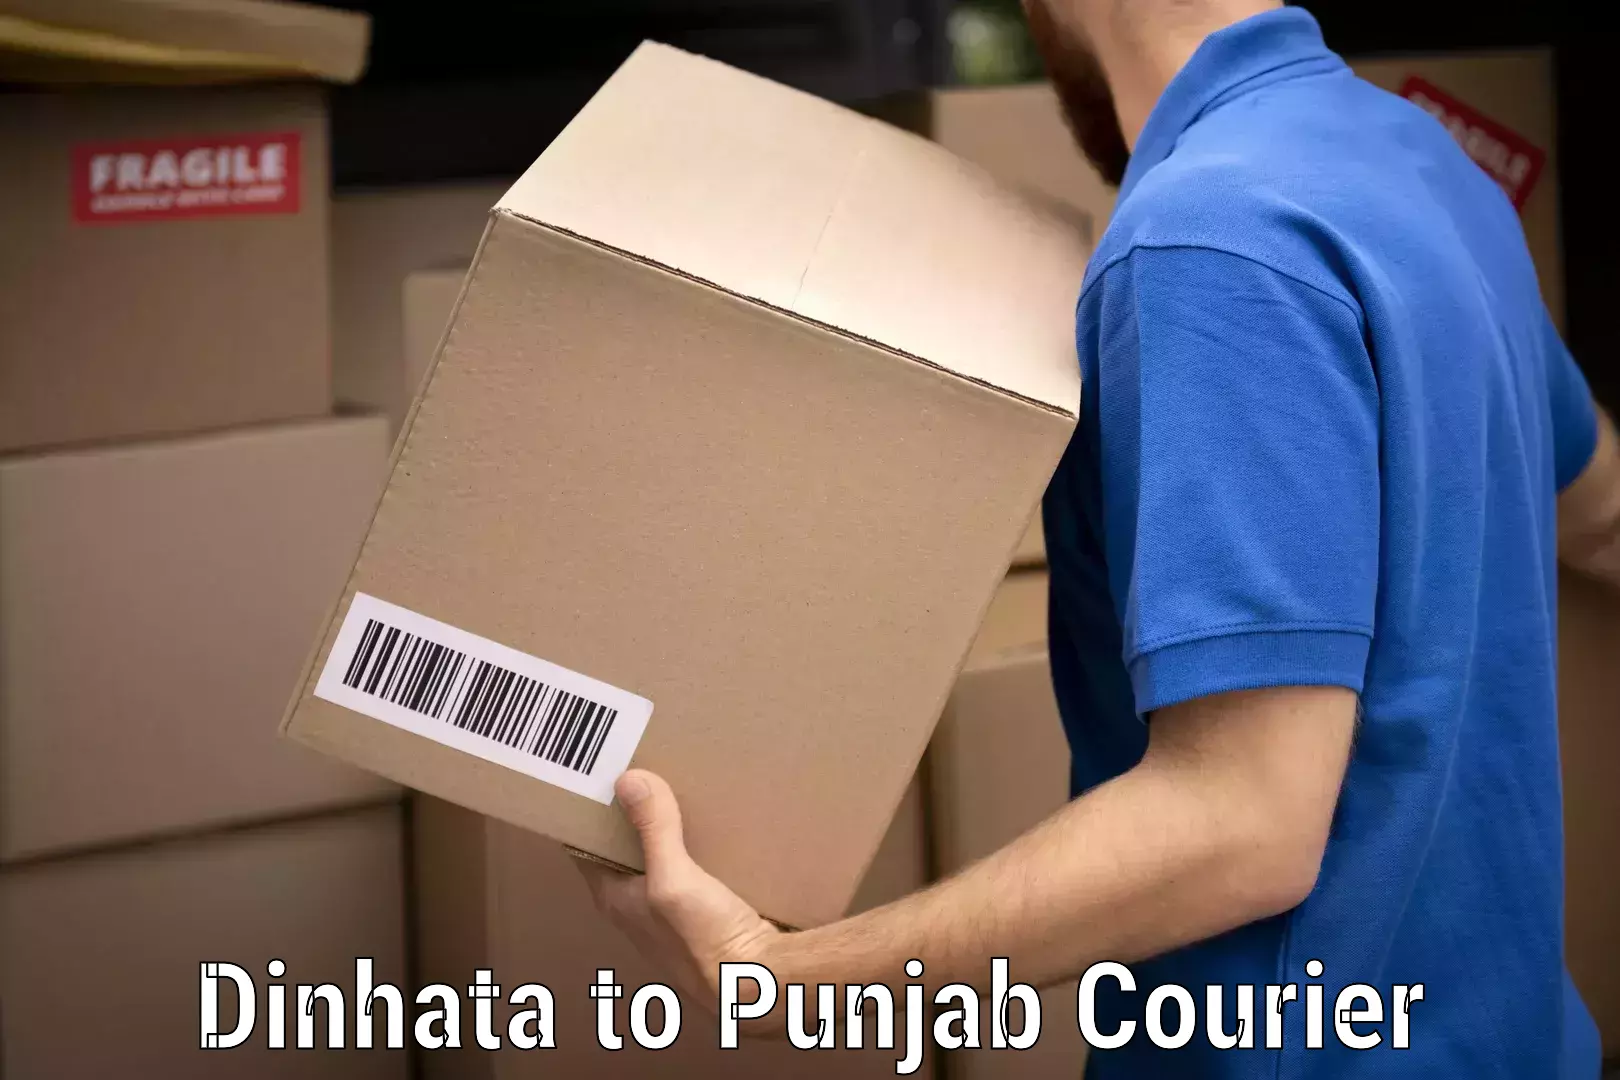 Professional relocation services Dinhata to Punjab